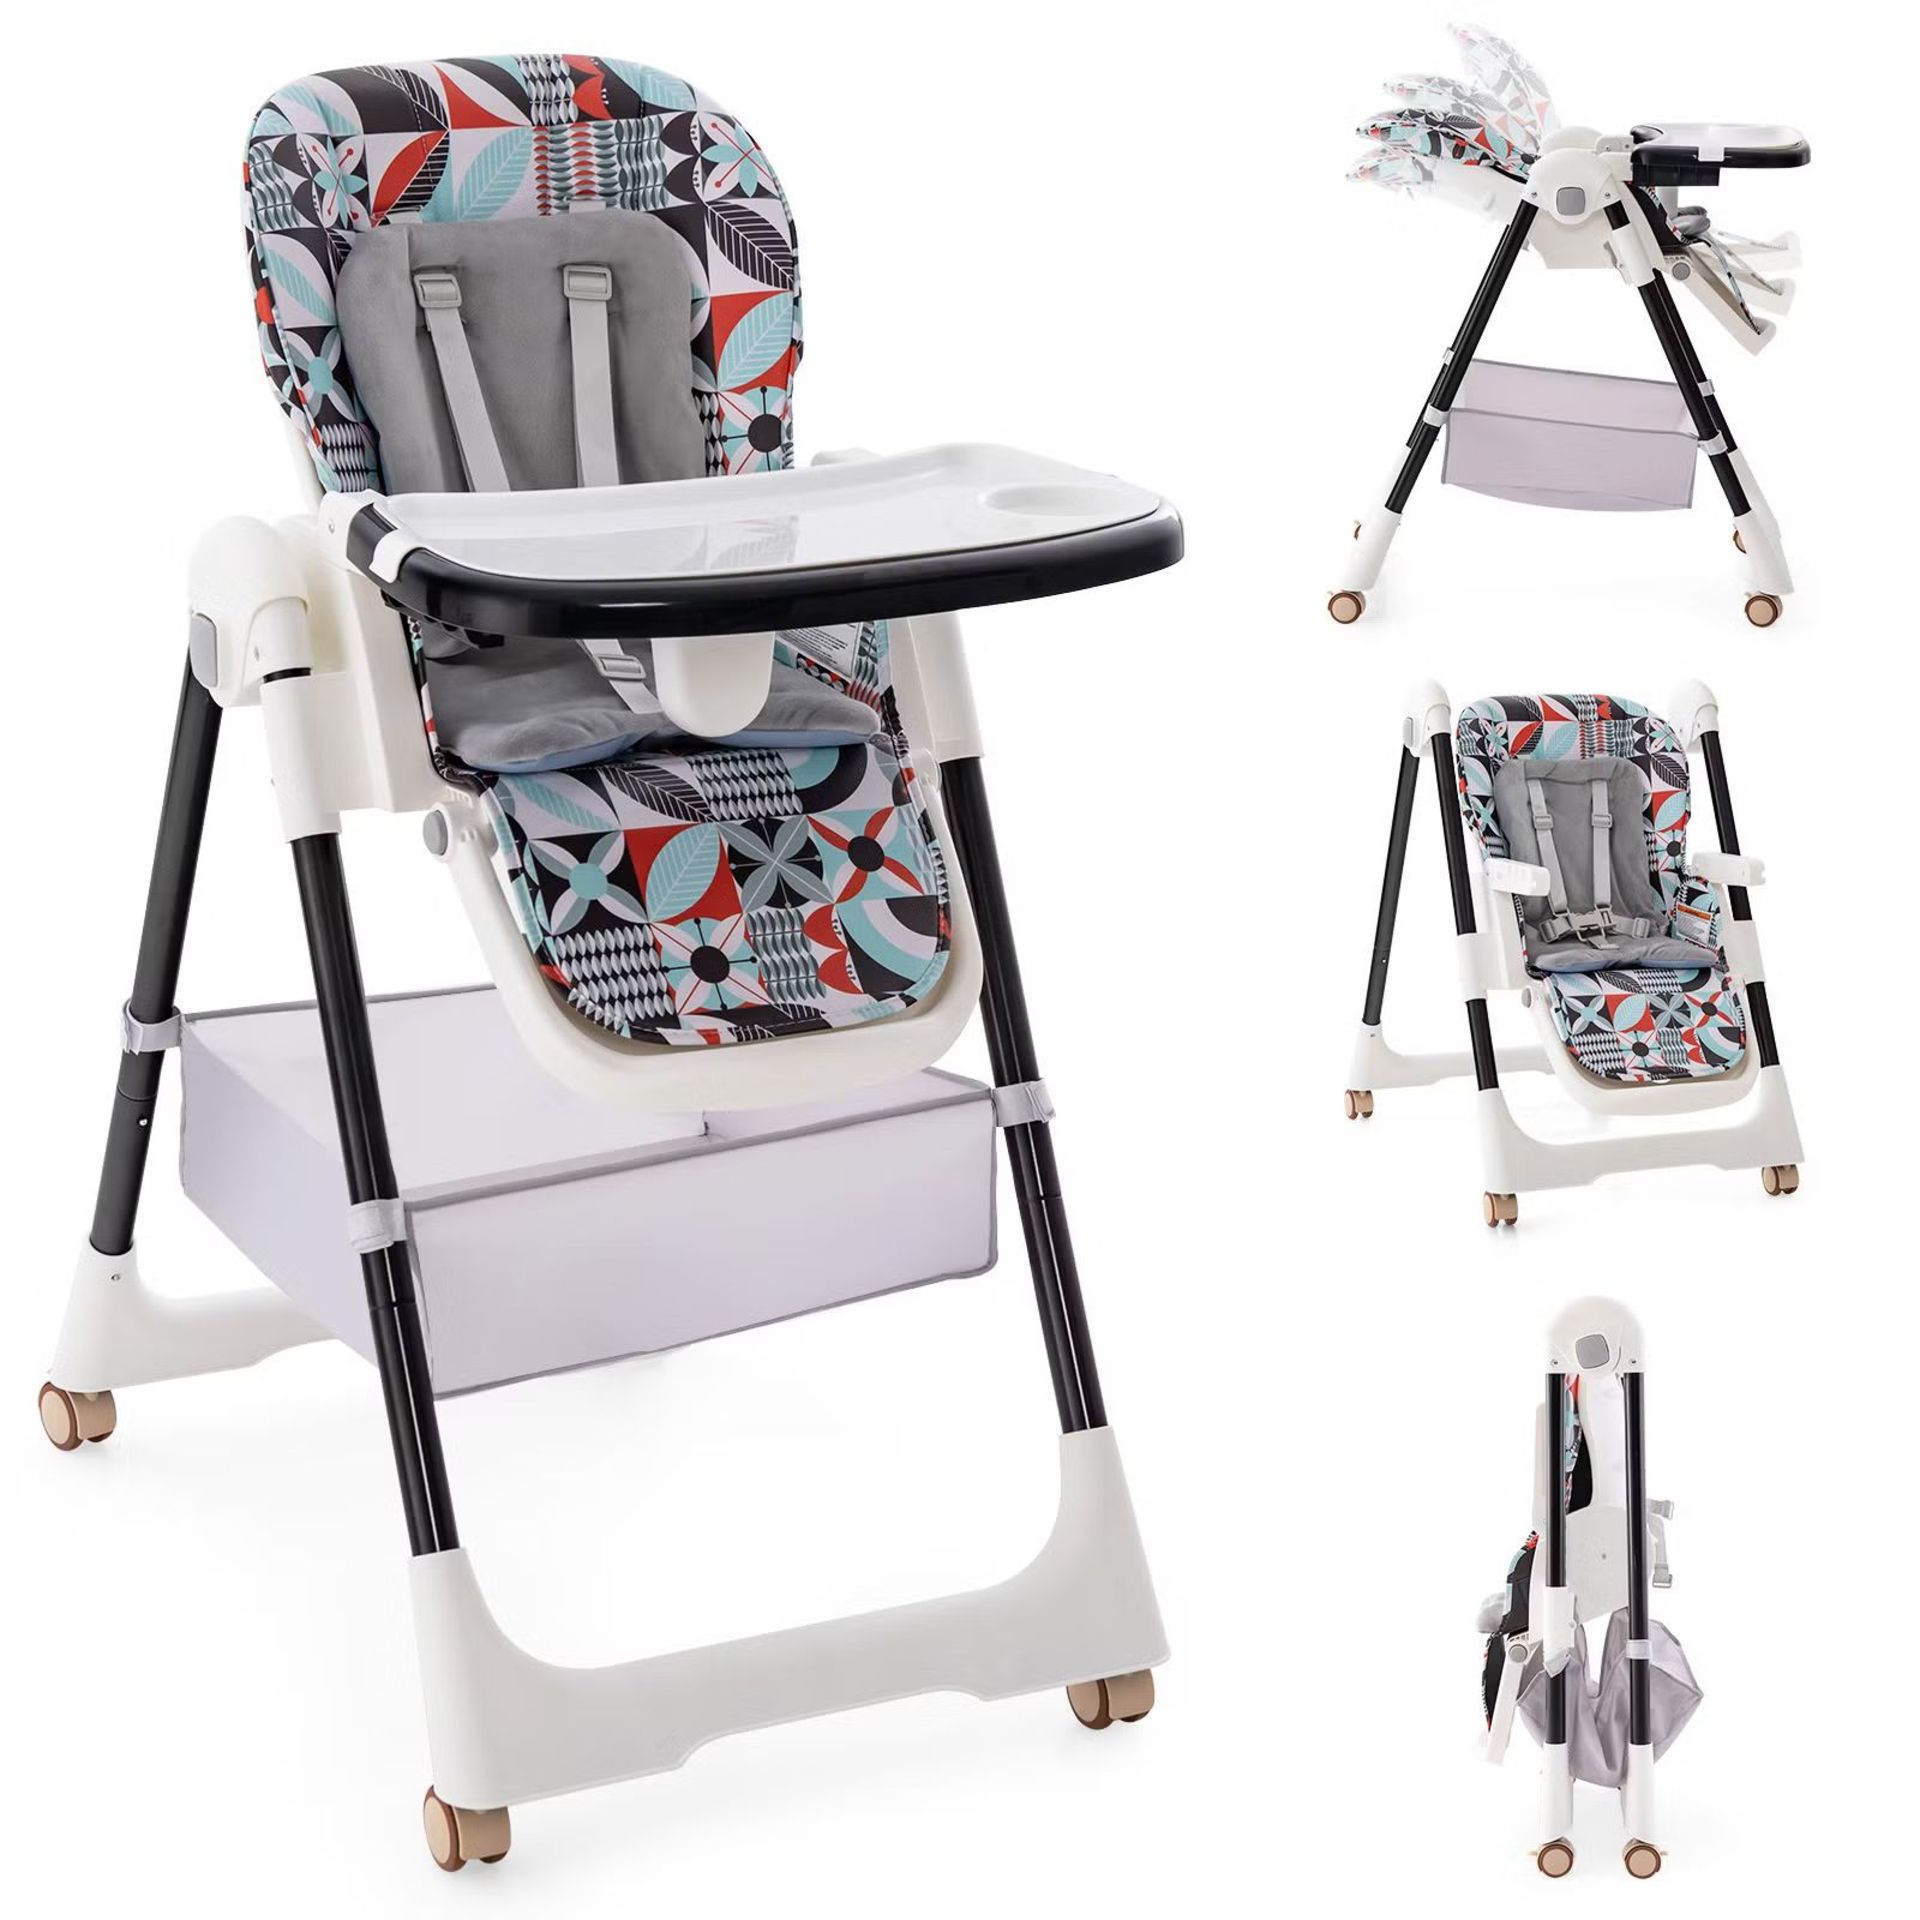 Folding Convertible Baby High Chair with Reclining Backrest-Light Grey. - R14.13.